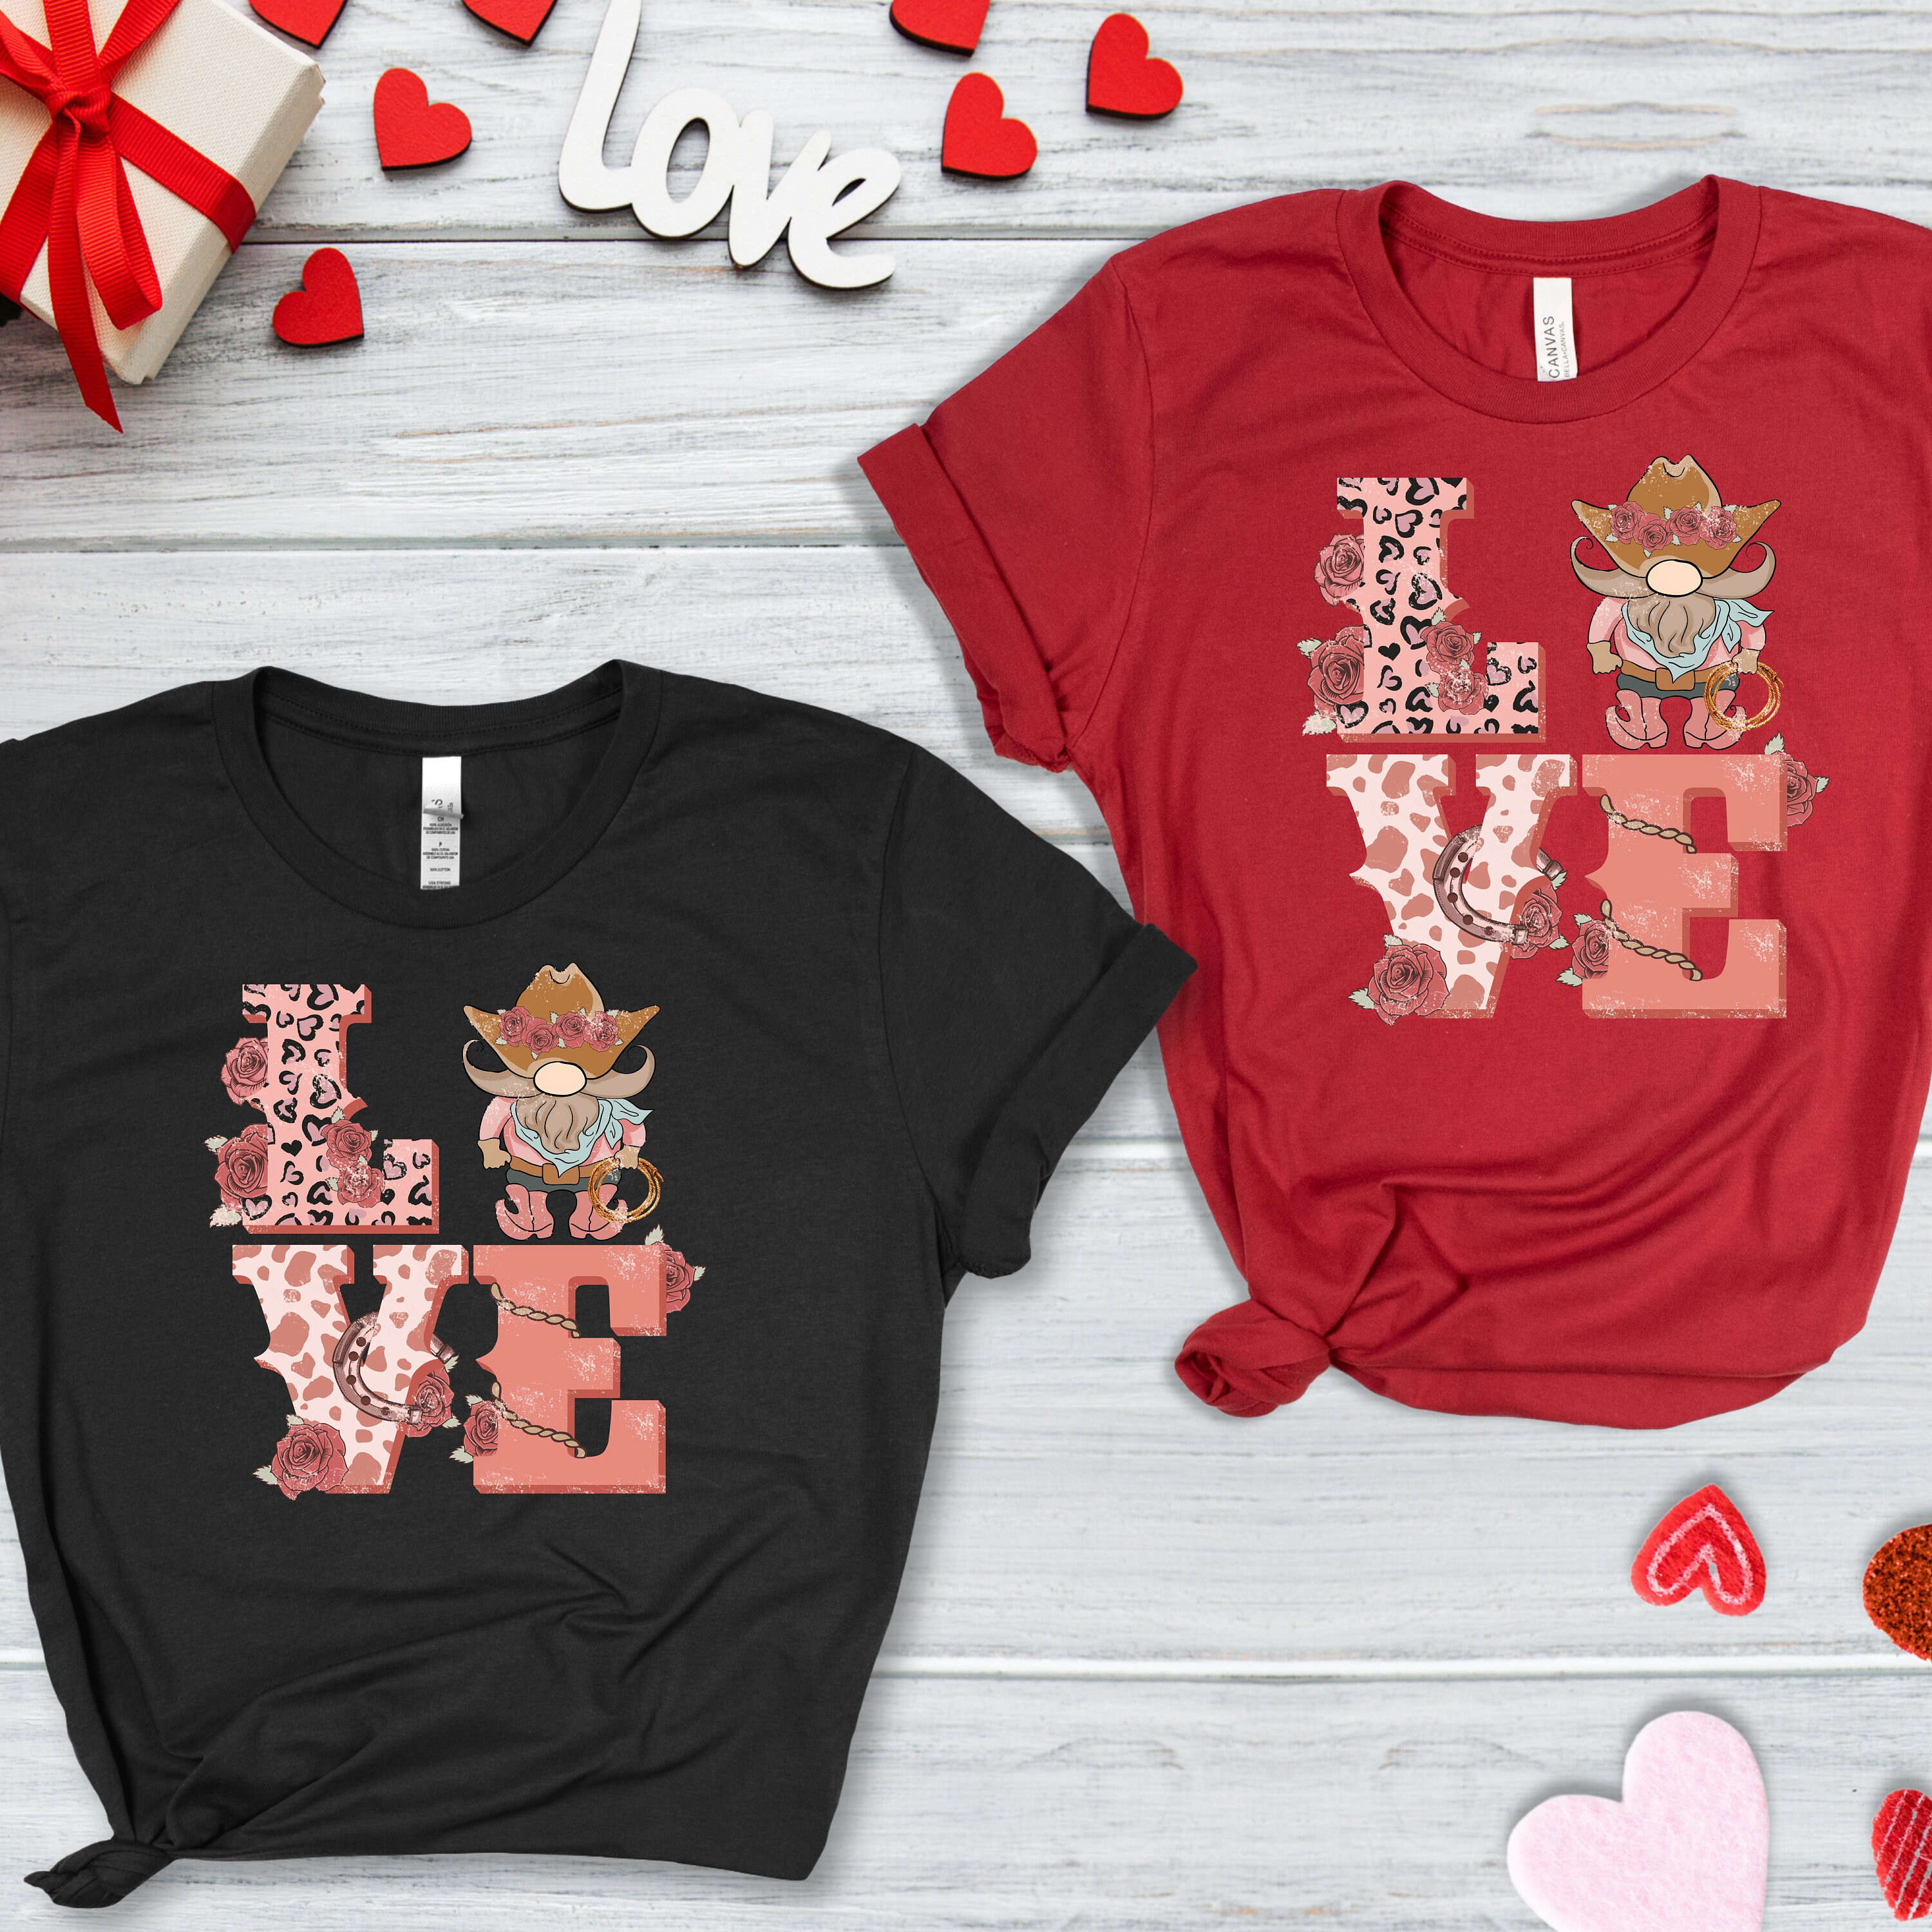 Cowboy Love Retro Shirt – Perfect Valentine s Day Gift for Women